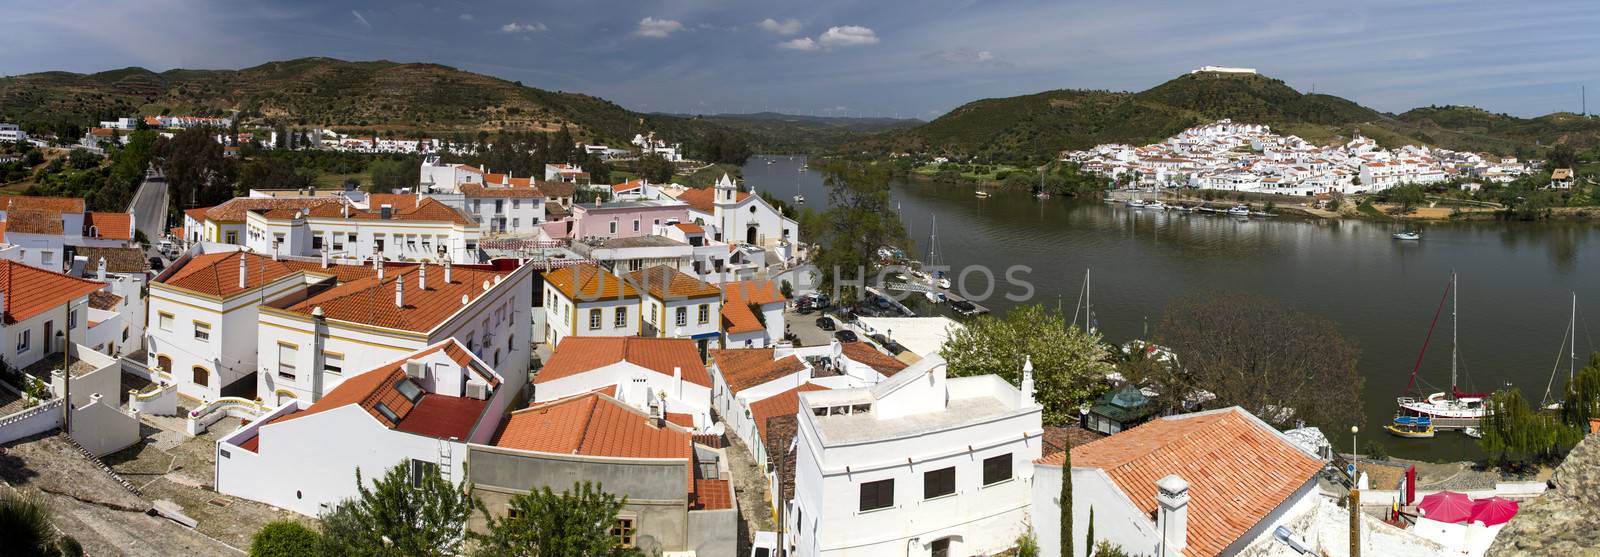 Far view of Sanlucar town in the Guadiana river located in Spain taken from Alcoutim town in Portugal.